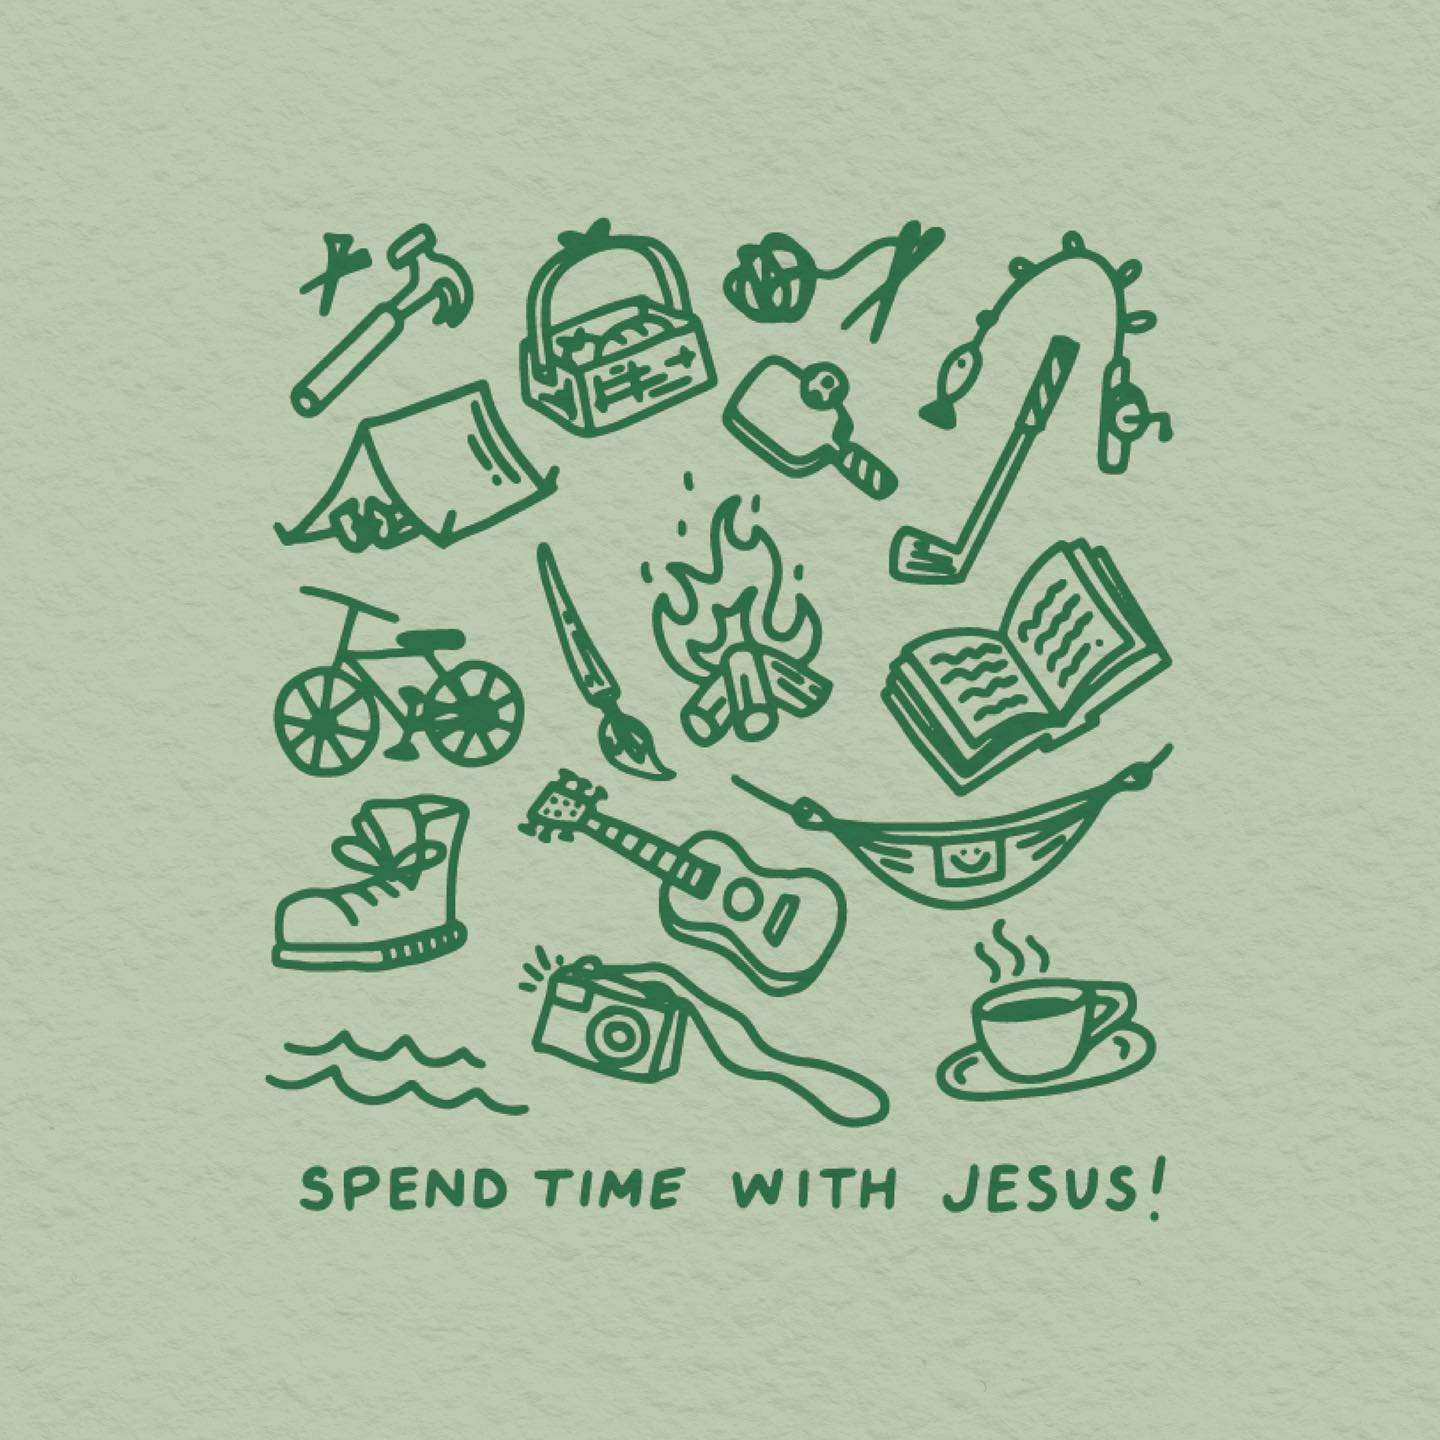 SPEND TIME WITH JESUS - Proclamation Coalition 